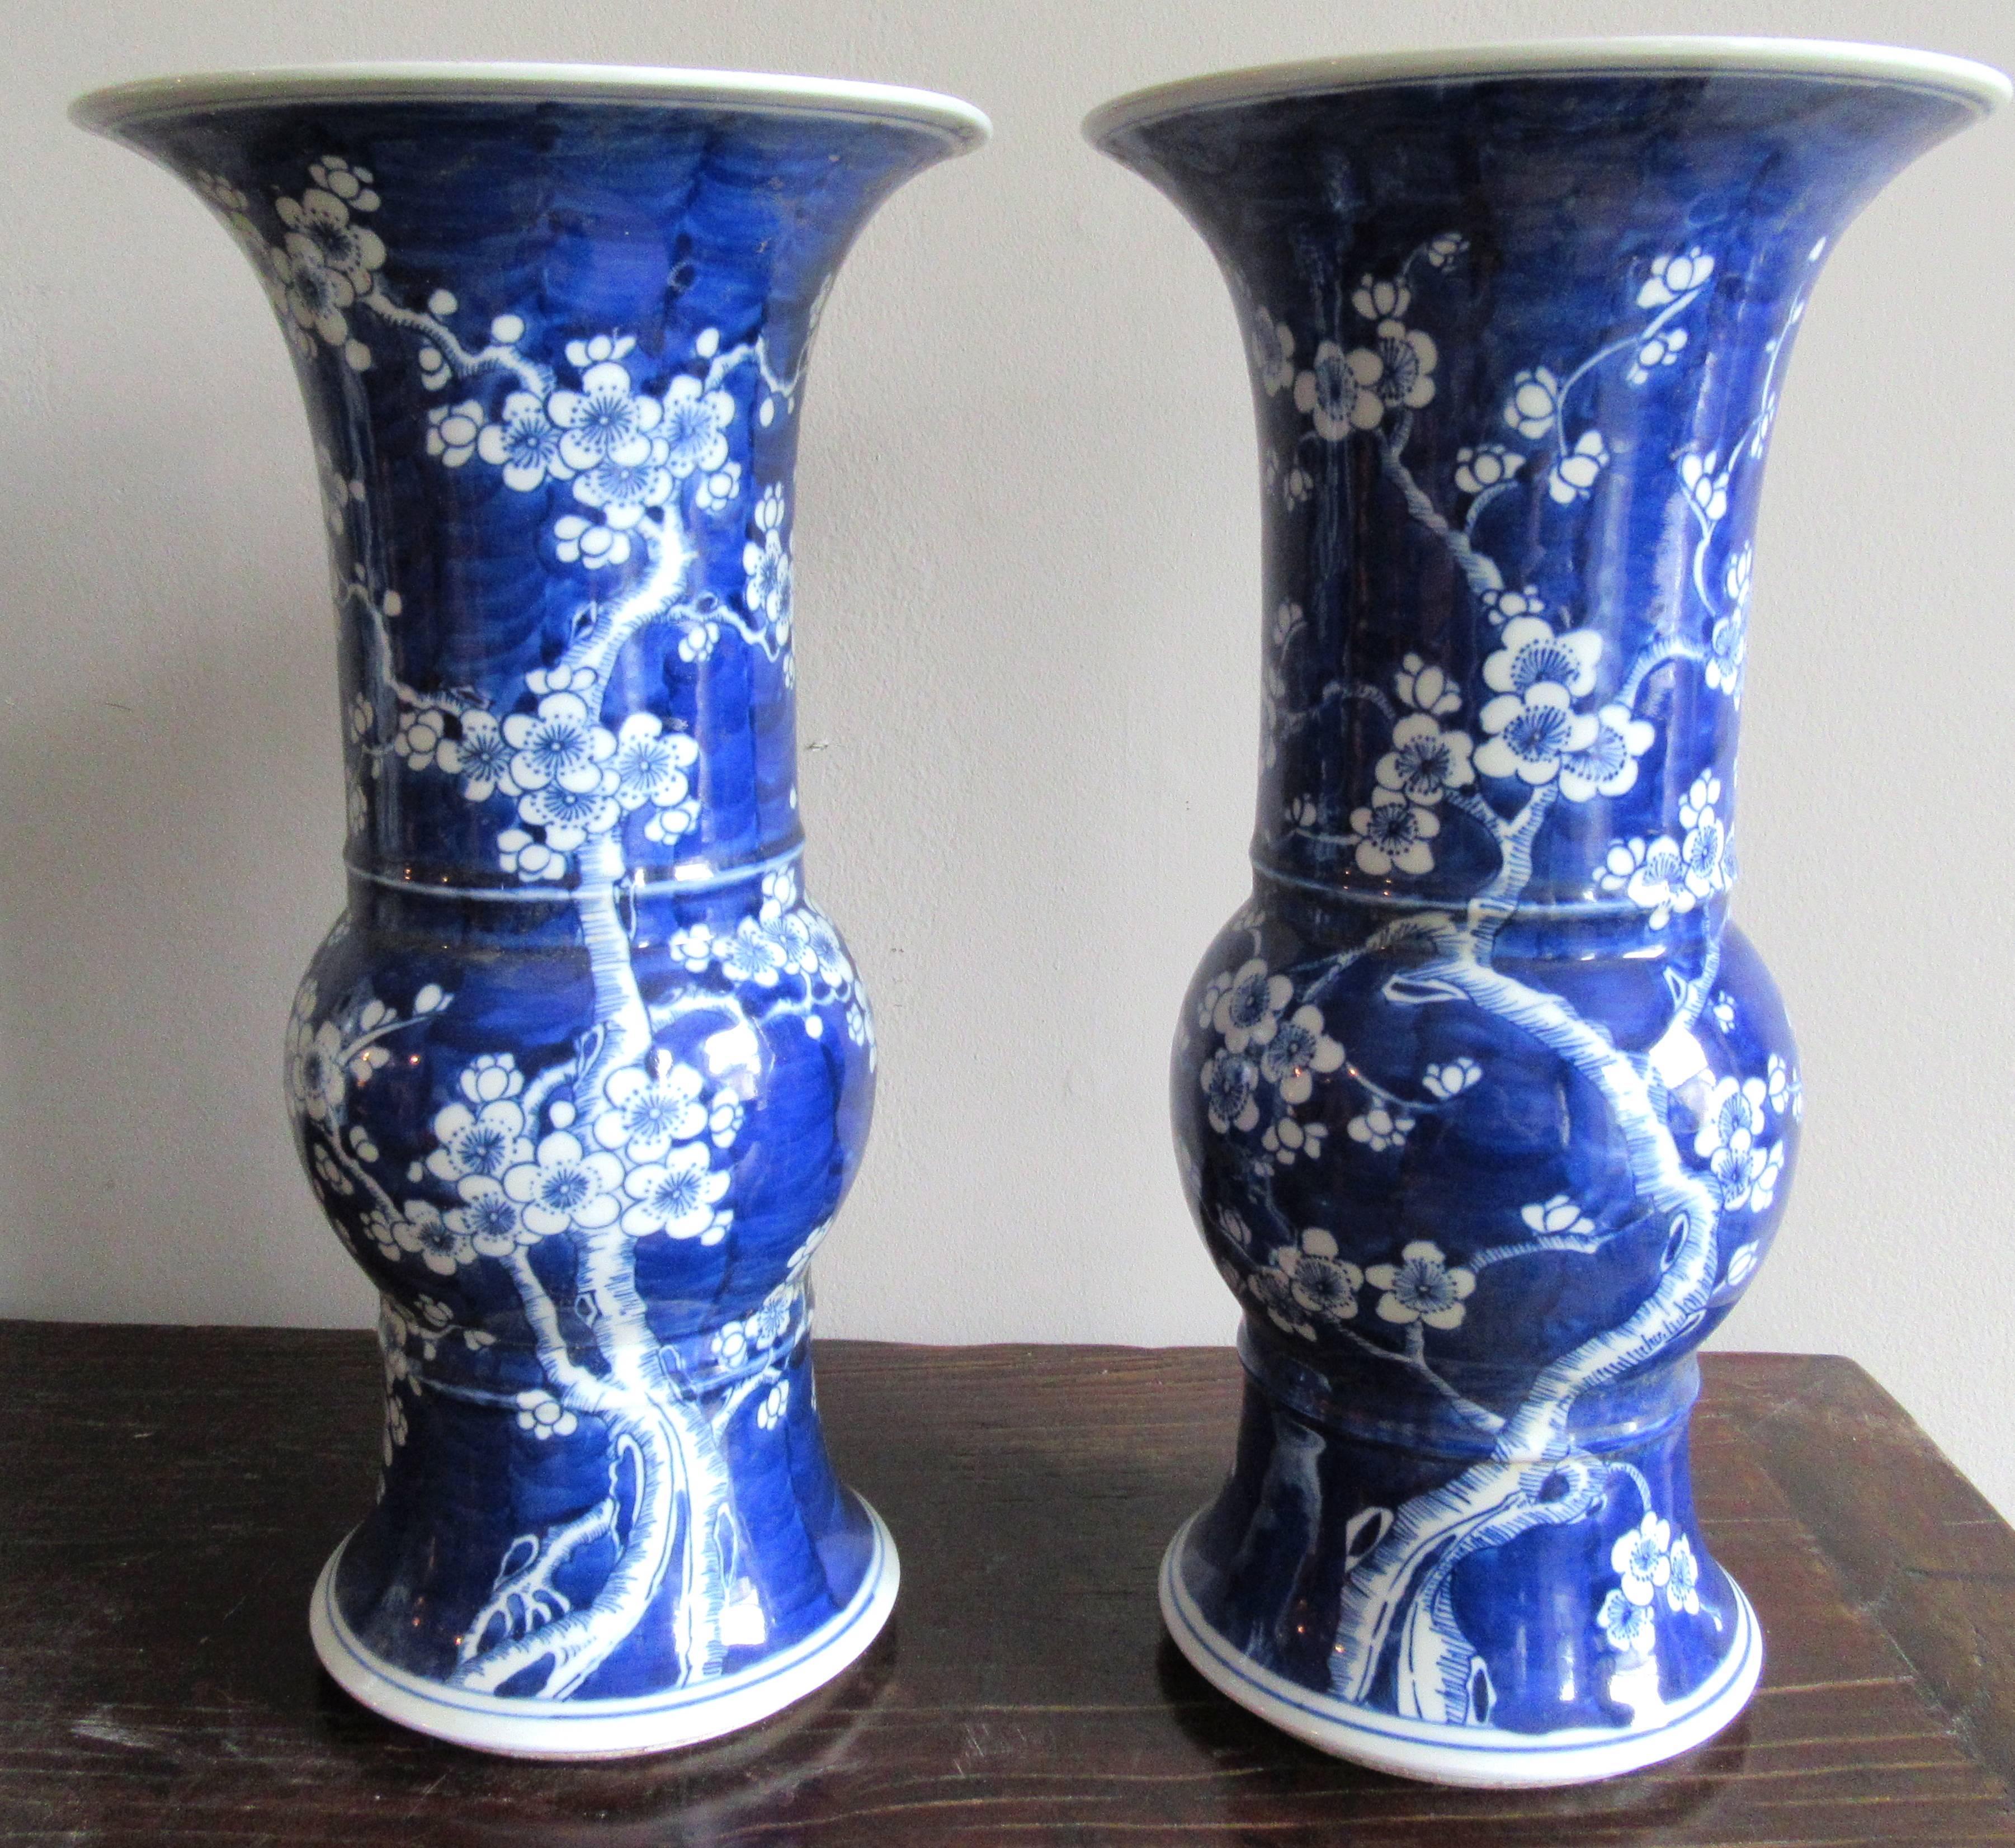 Pair of Chinese porcelain baluster shape vases with cherry blossom motif on a vibrant indigo background.